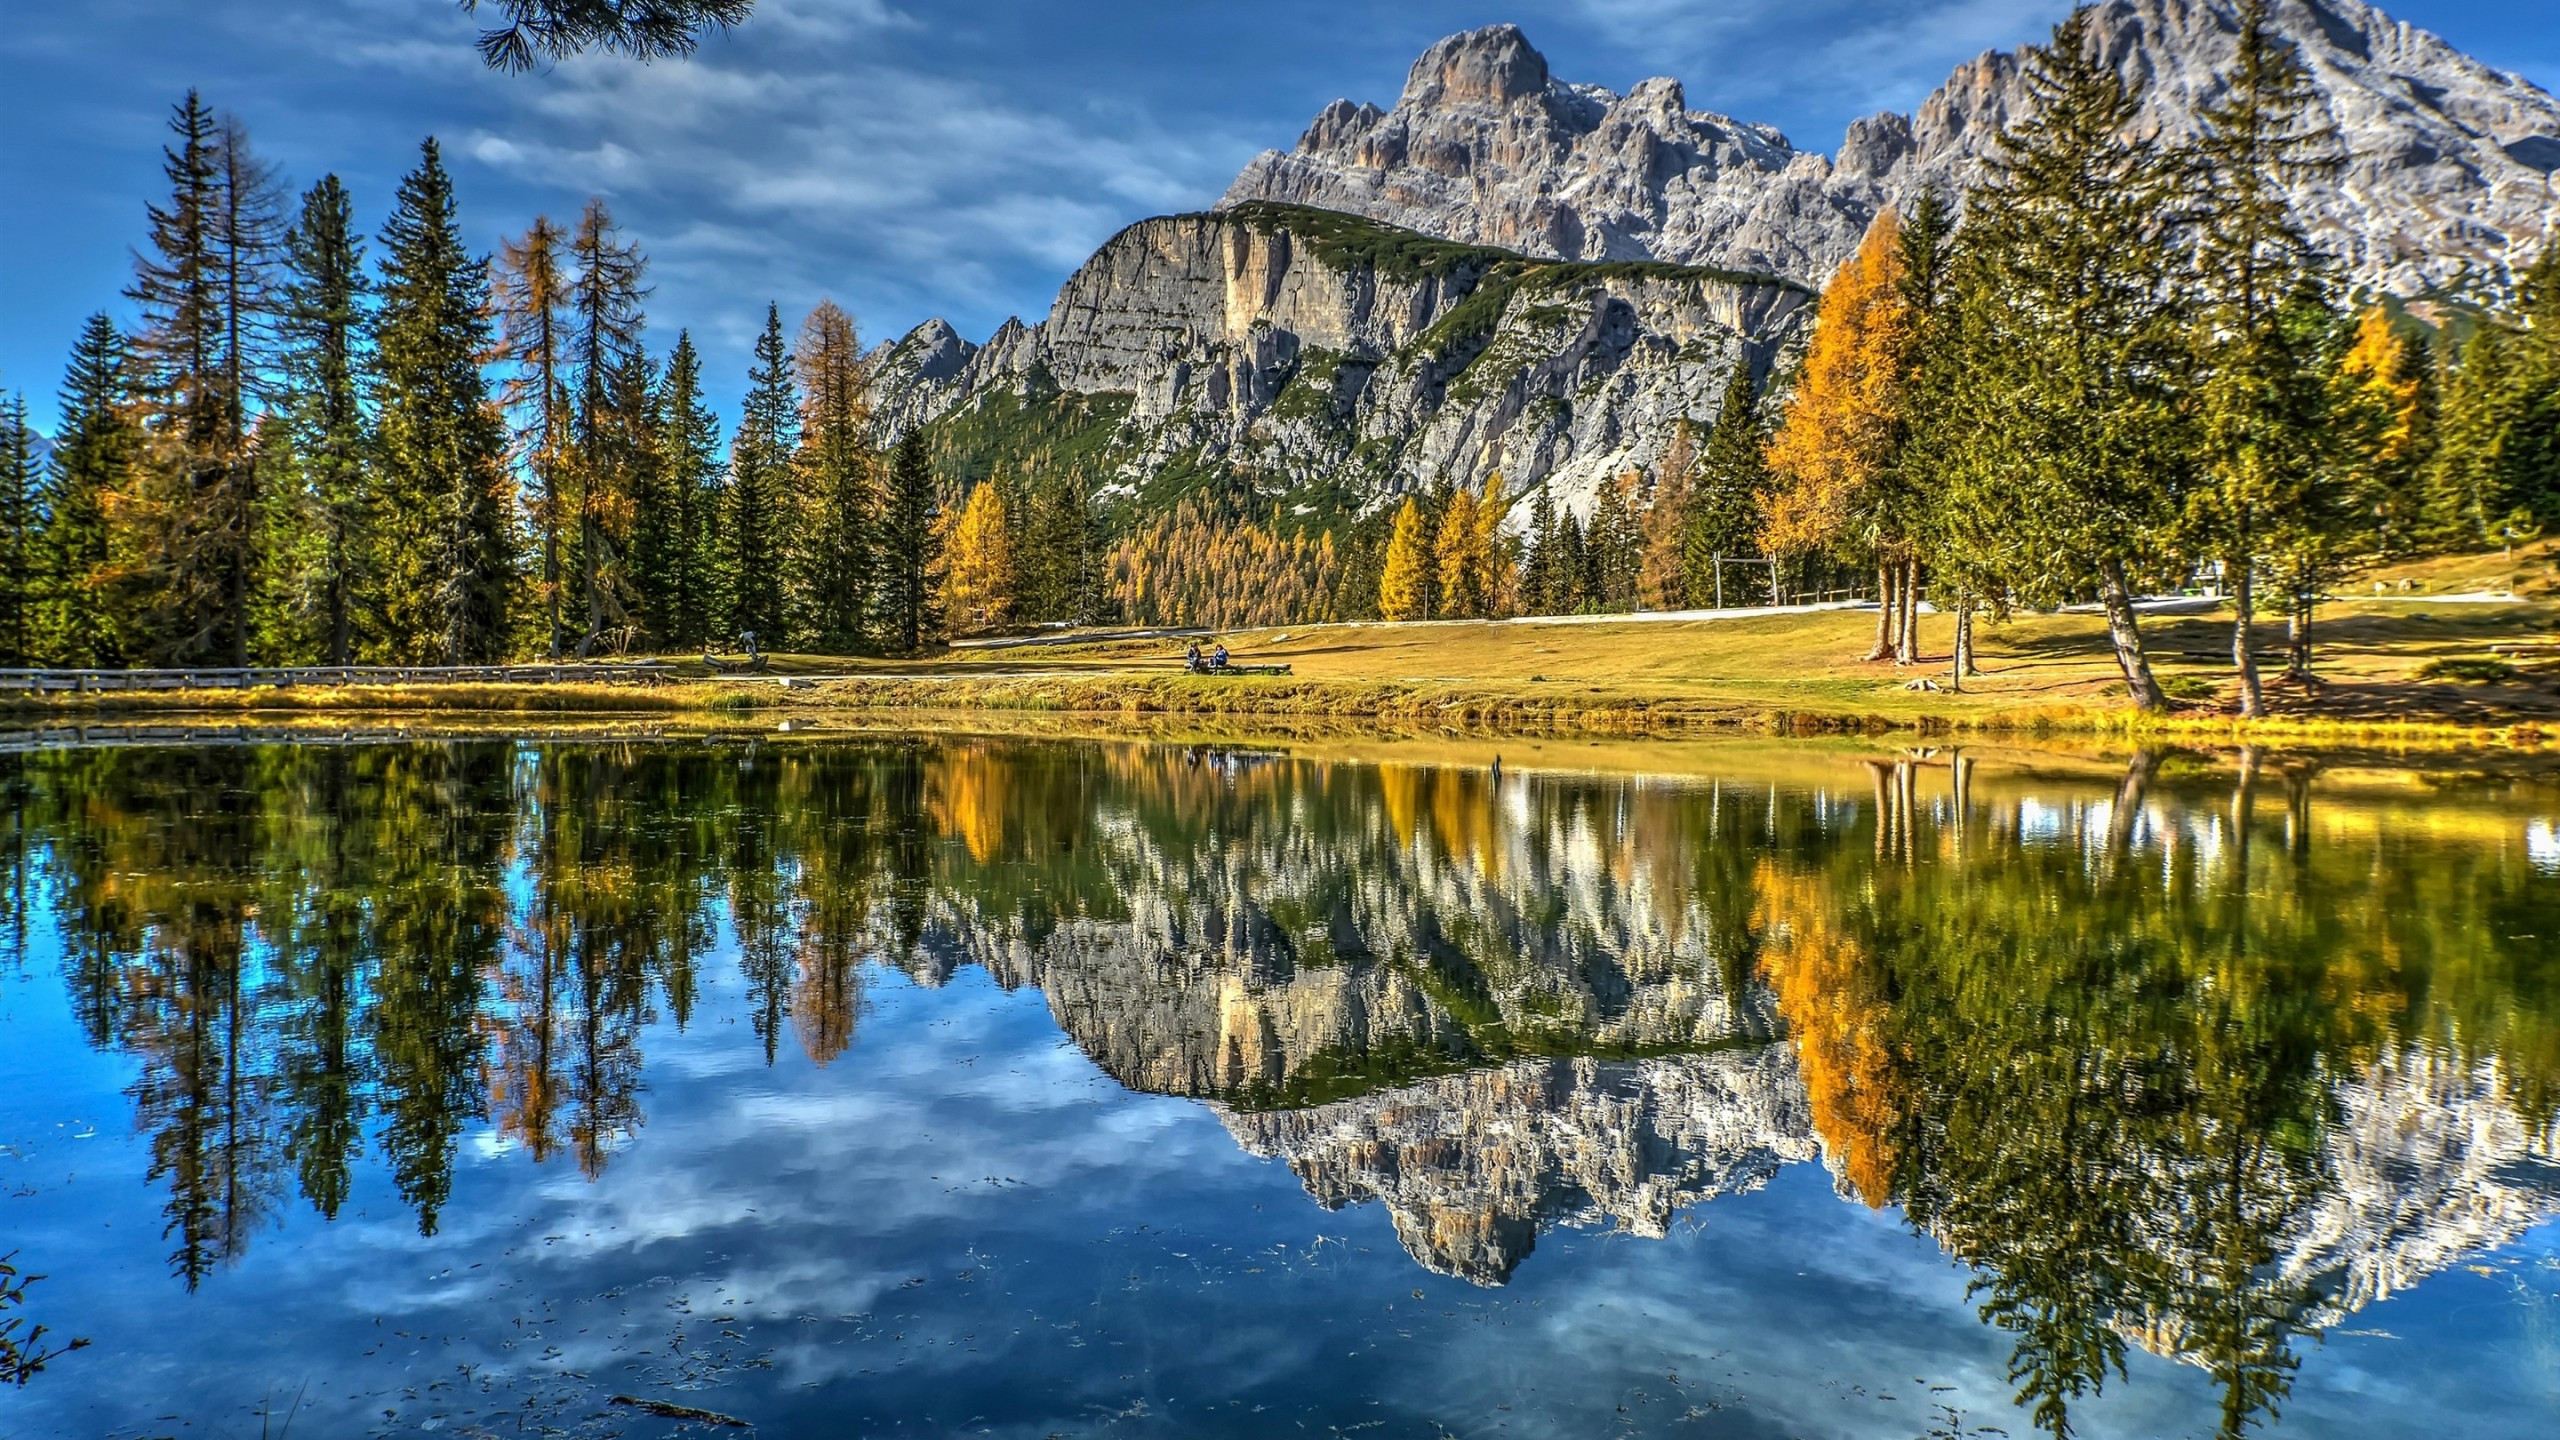 Download 2560x1440 Lake, Trees, Reflection, Italy, Dolomites, Mountains, Sky, Autumn Wallpaper for iMac 27 inch